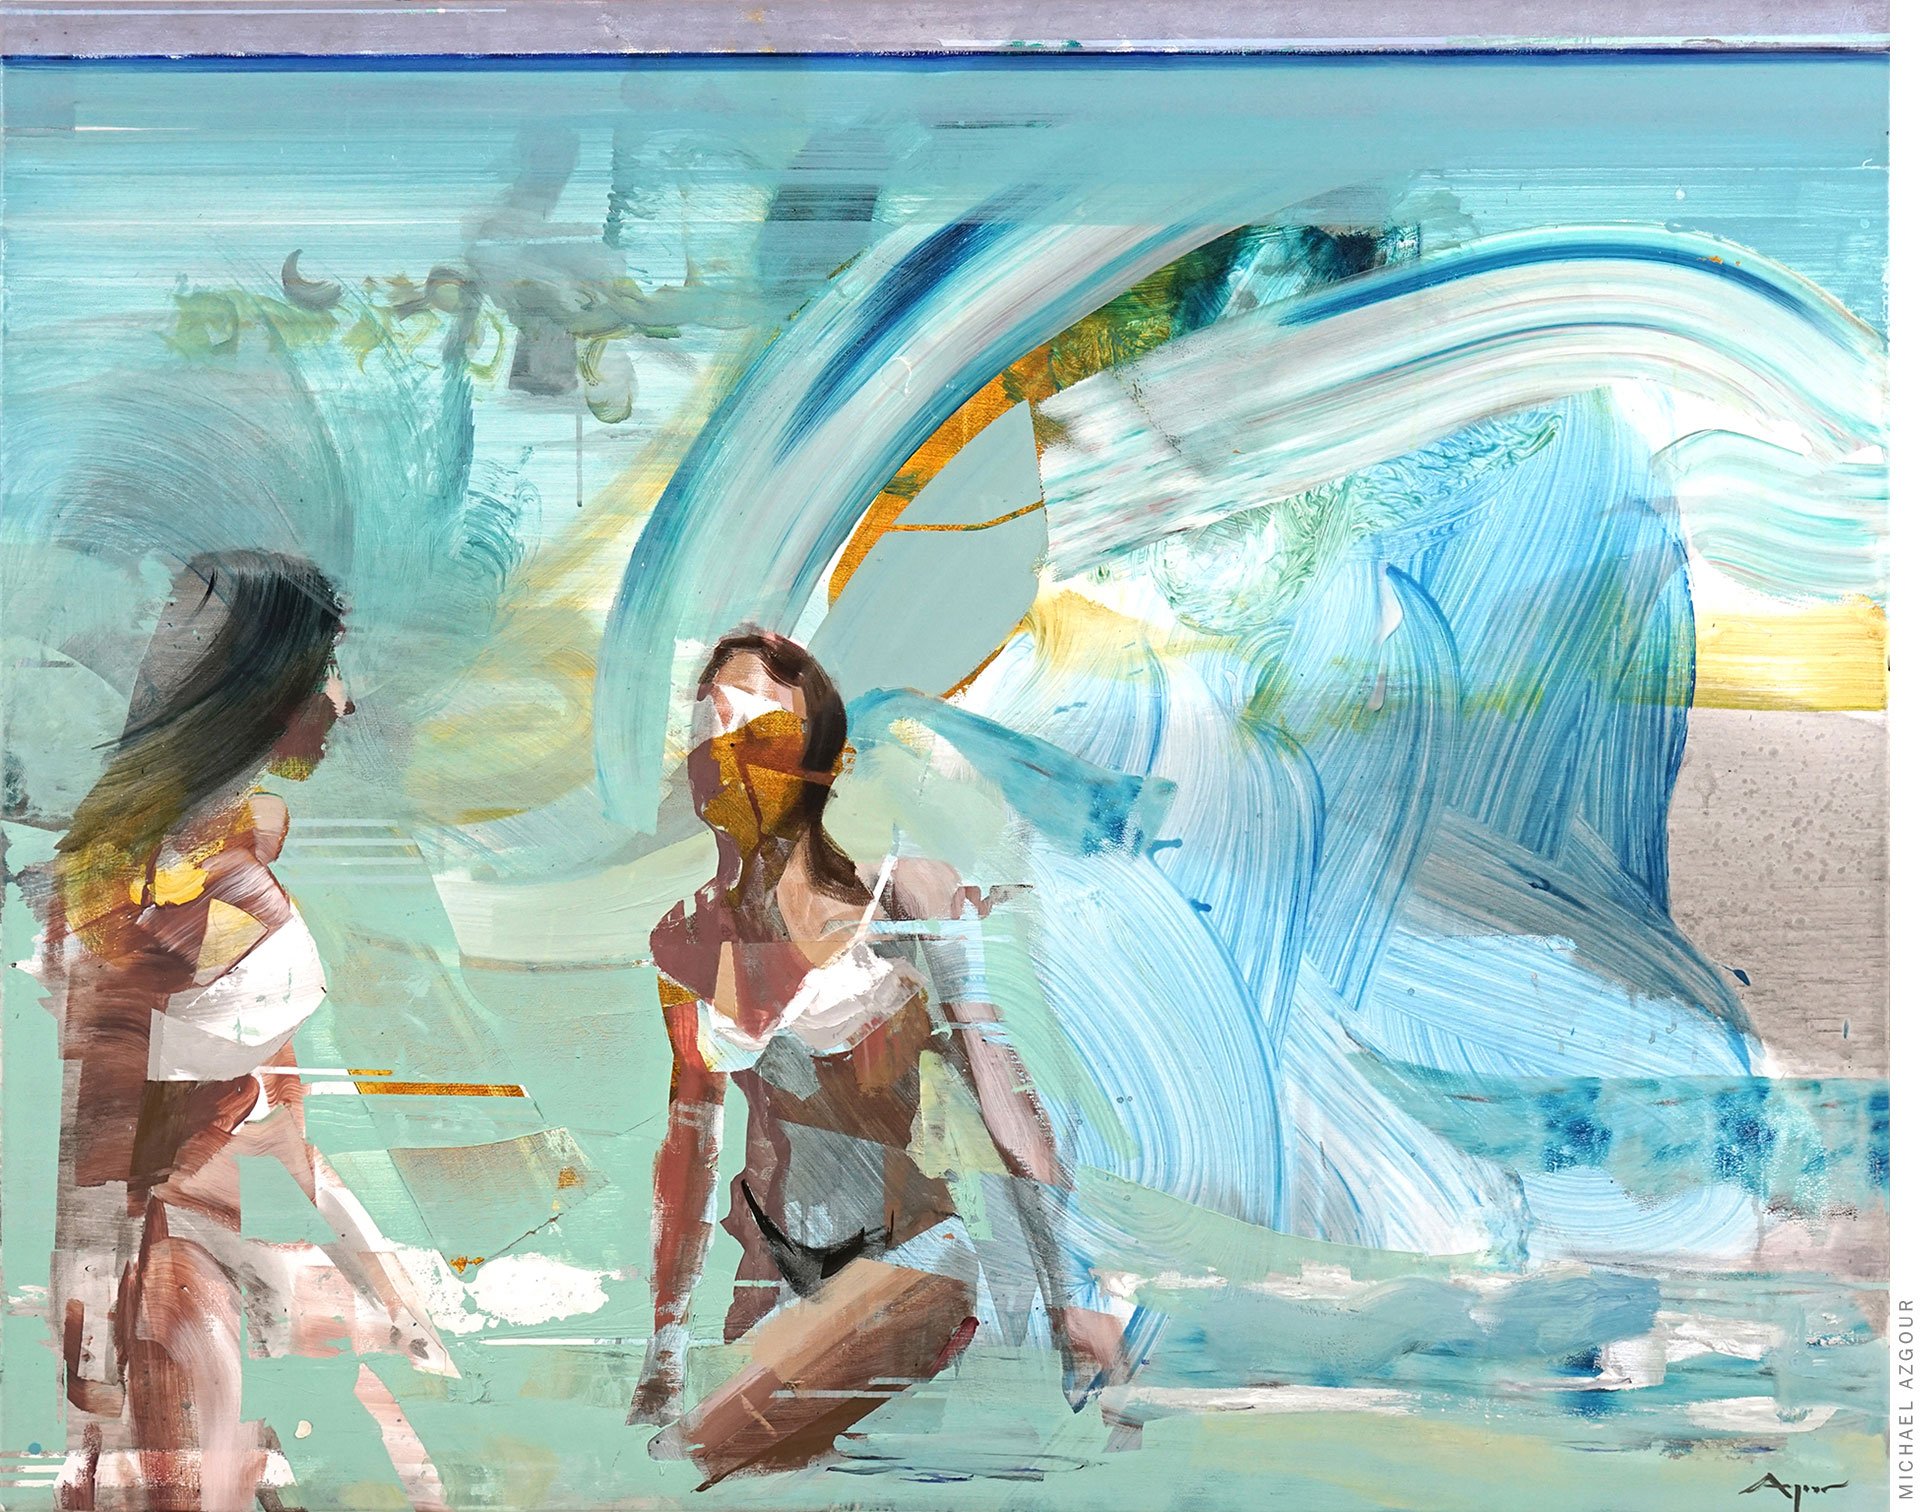 Original painting titled Bathers depicting women in a bikini in the ocean. Contemporary artwork by artist Michael Azgour.